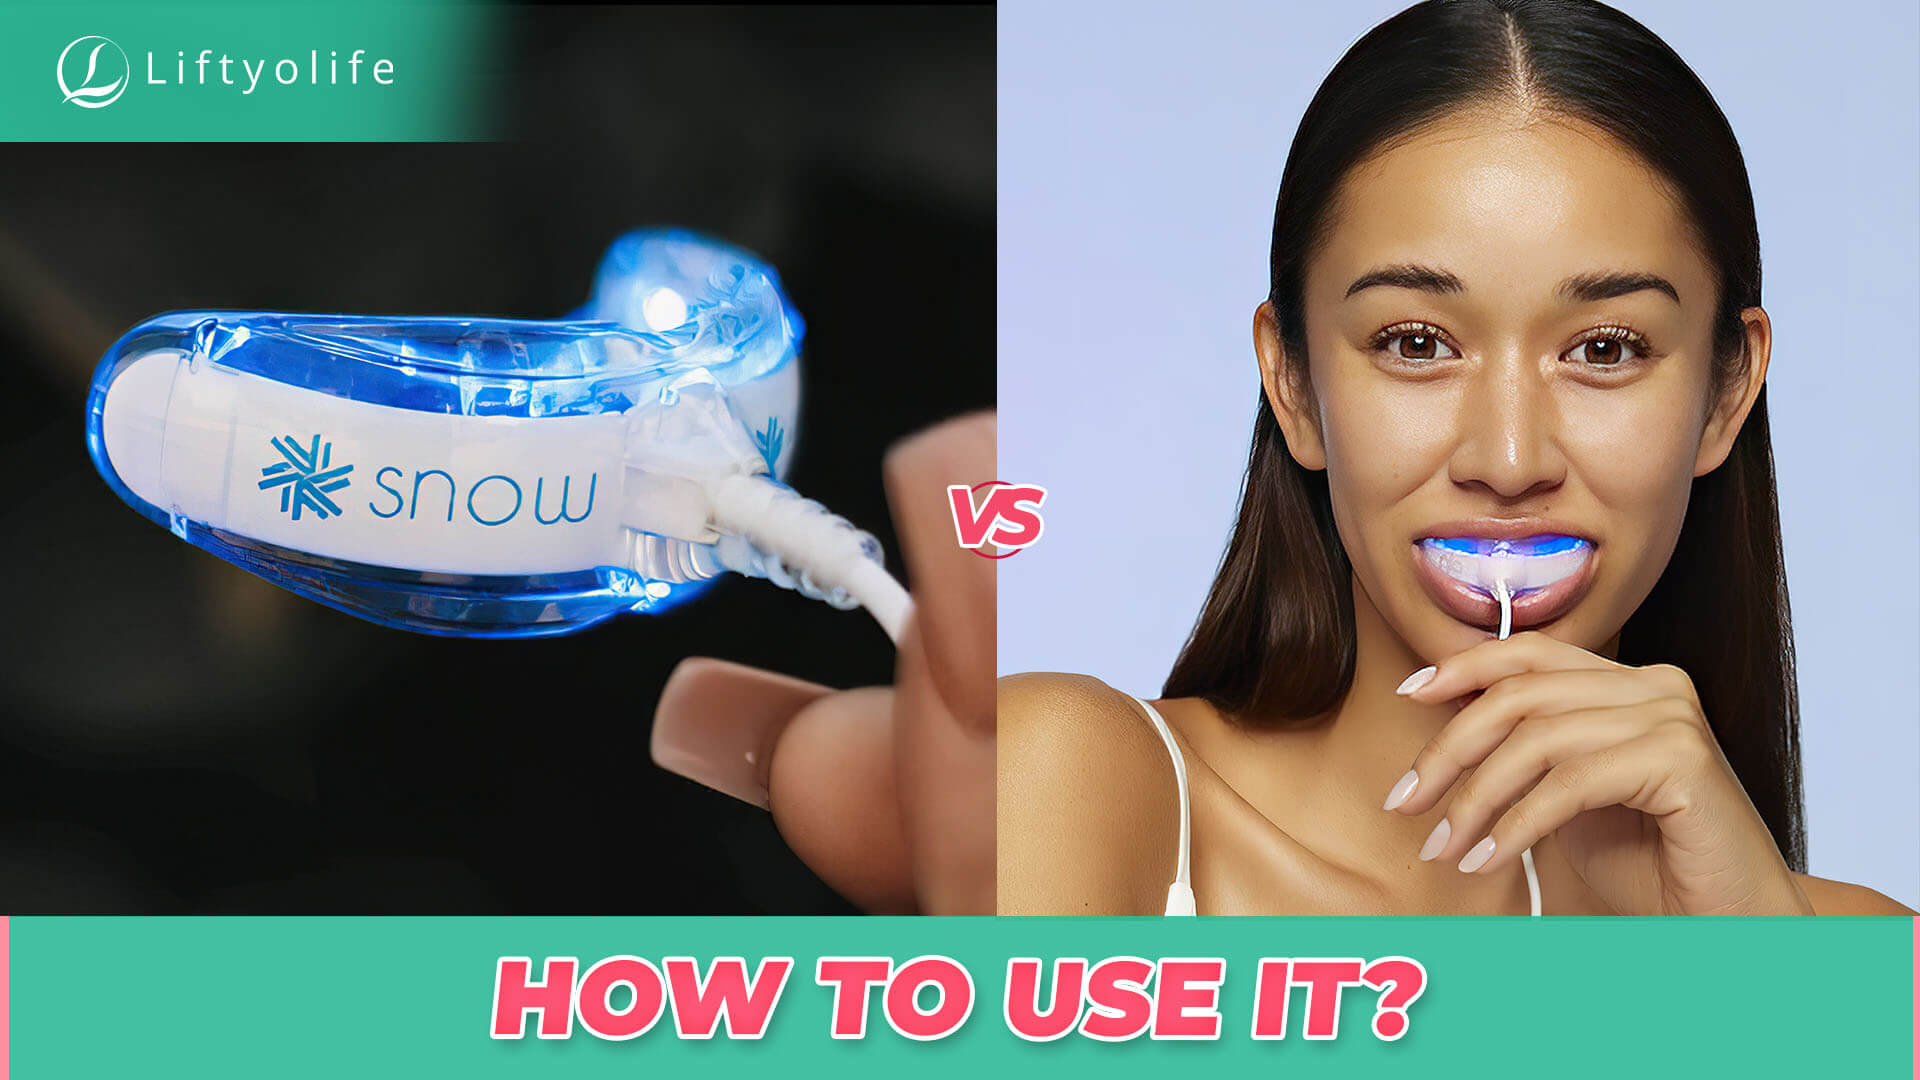 Snow Teeth Whitening Vs GLO: How To Use It?